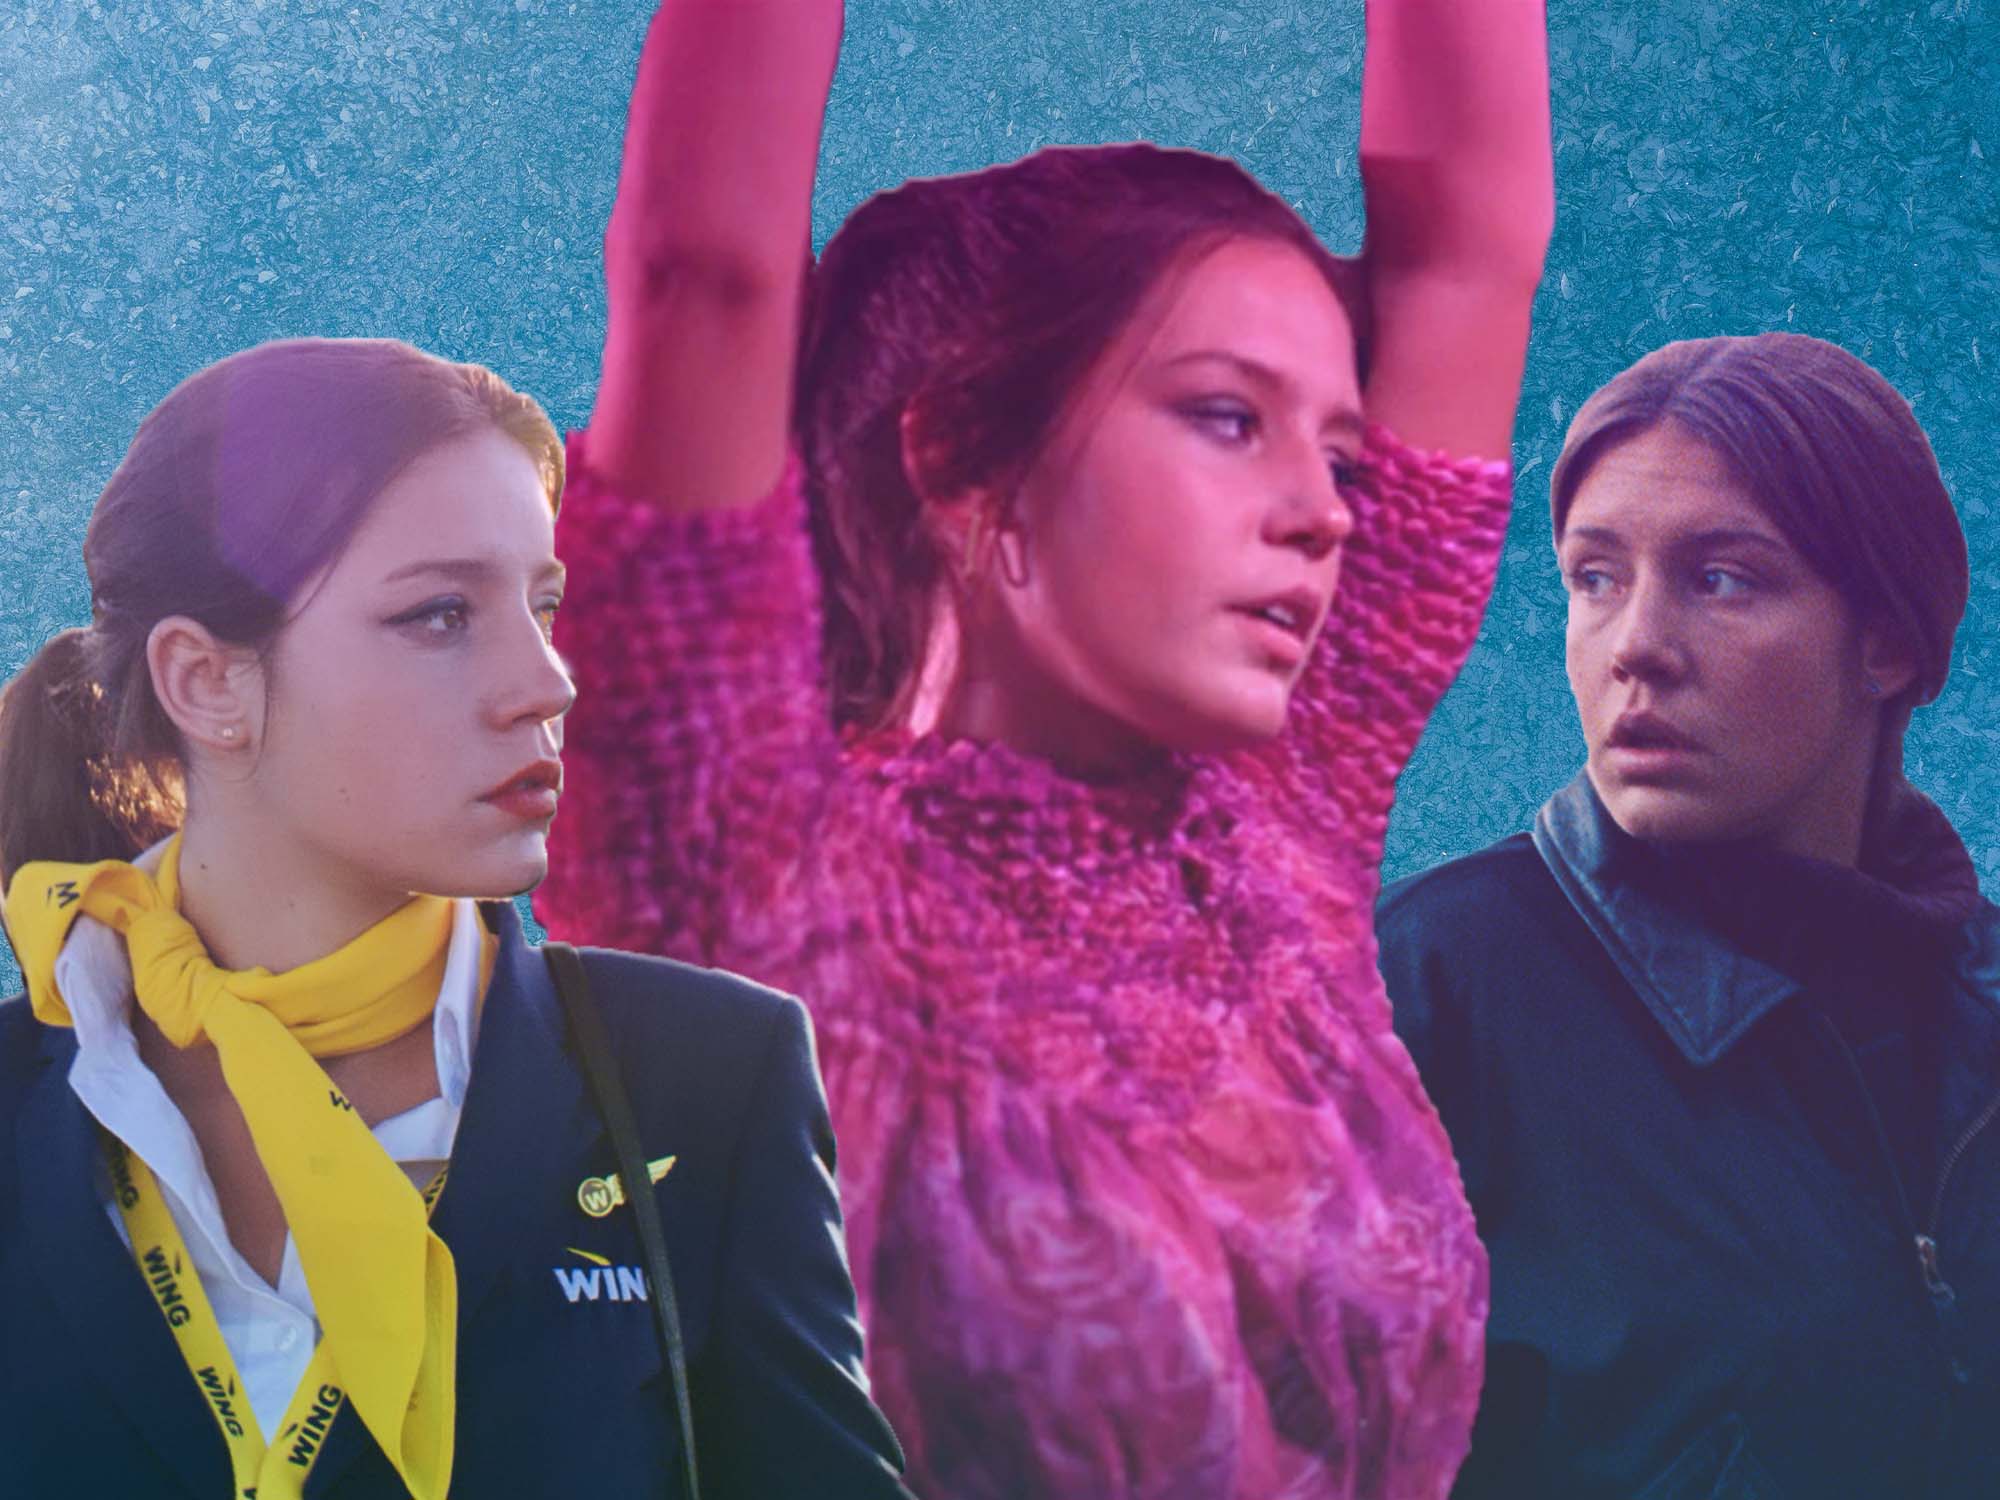 Adele Exarchopoulos in her own words